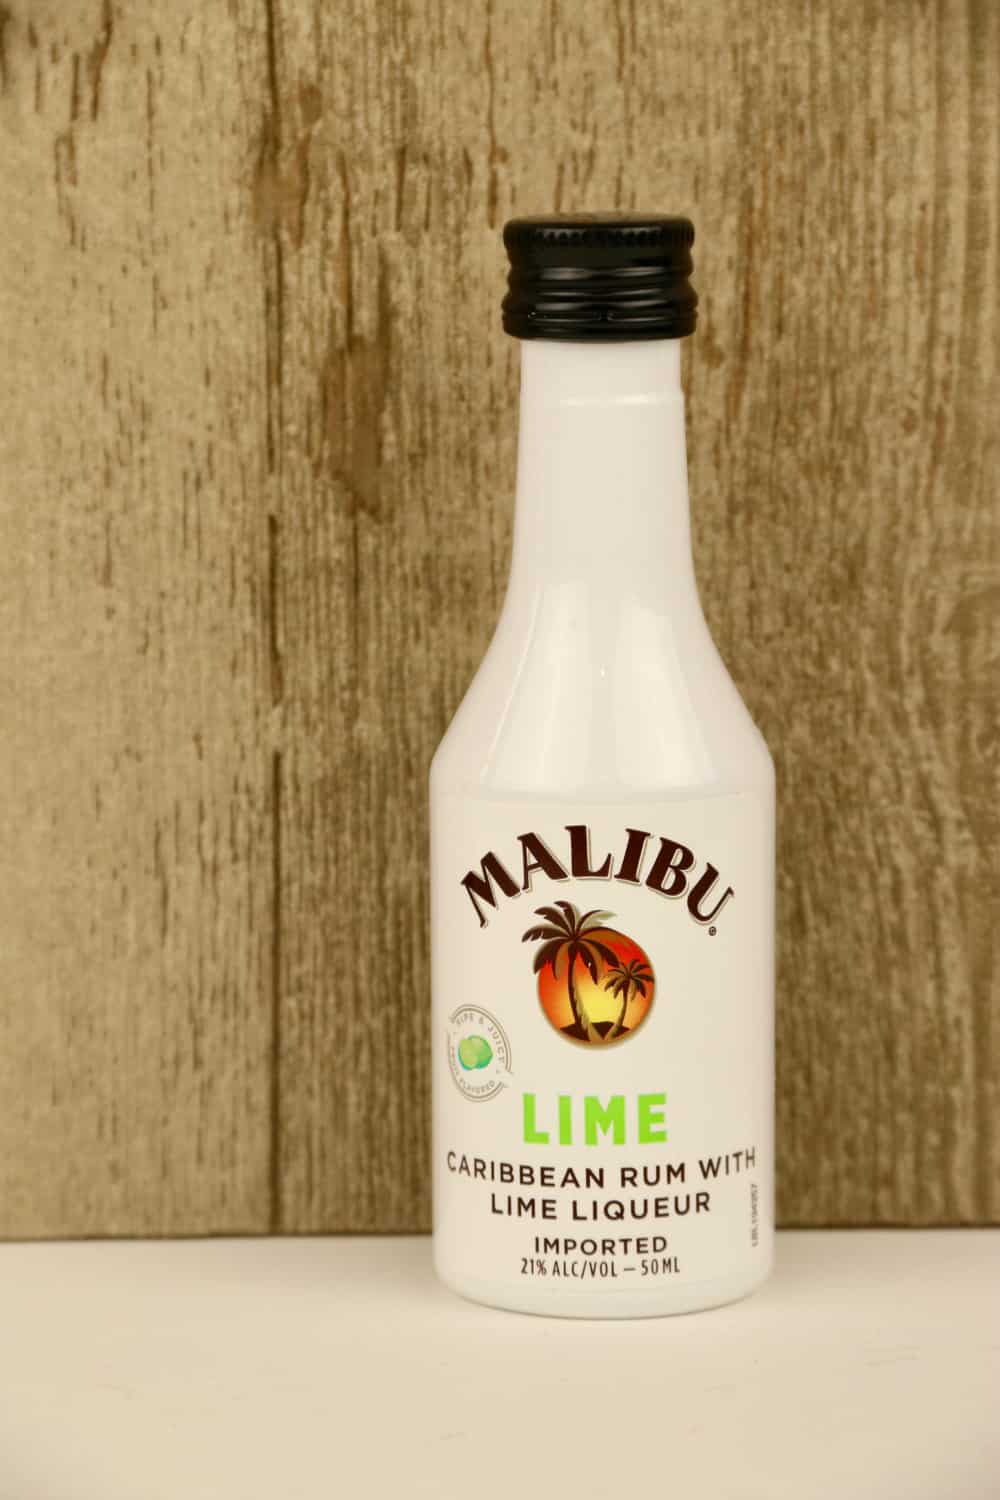 3 Tips to Tell If Malibu Rum Has Gone Bad